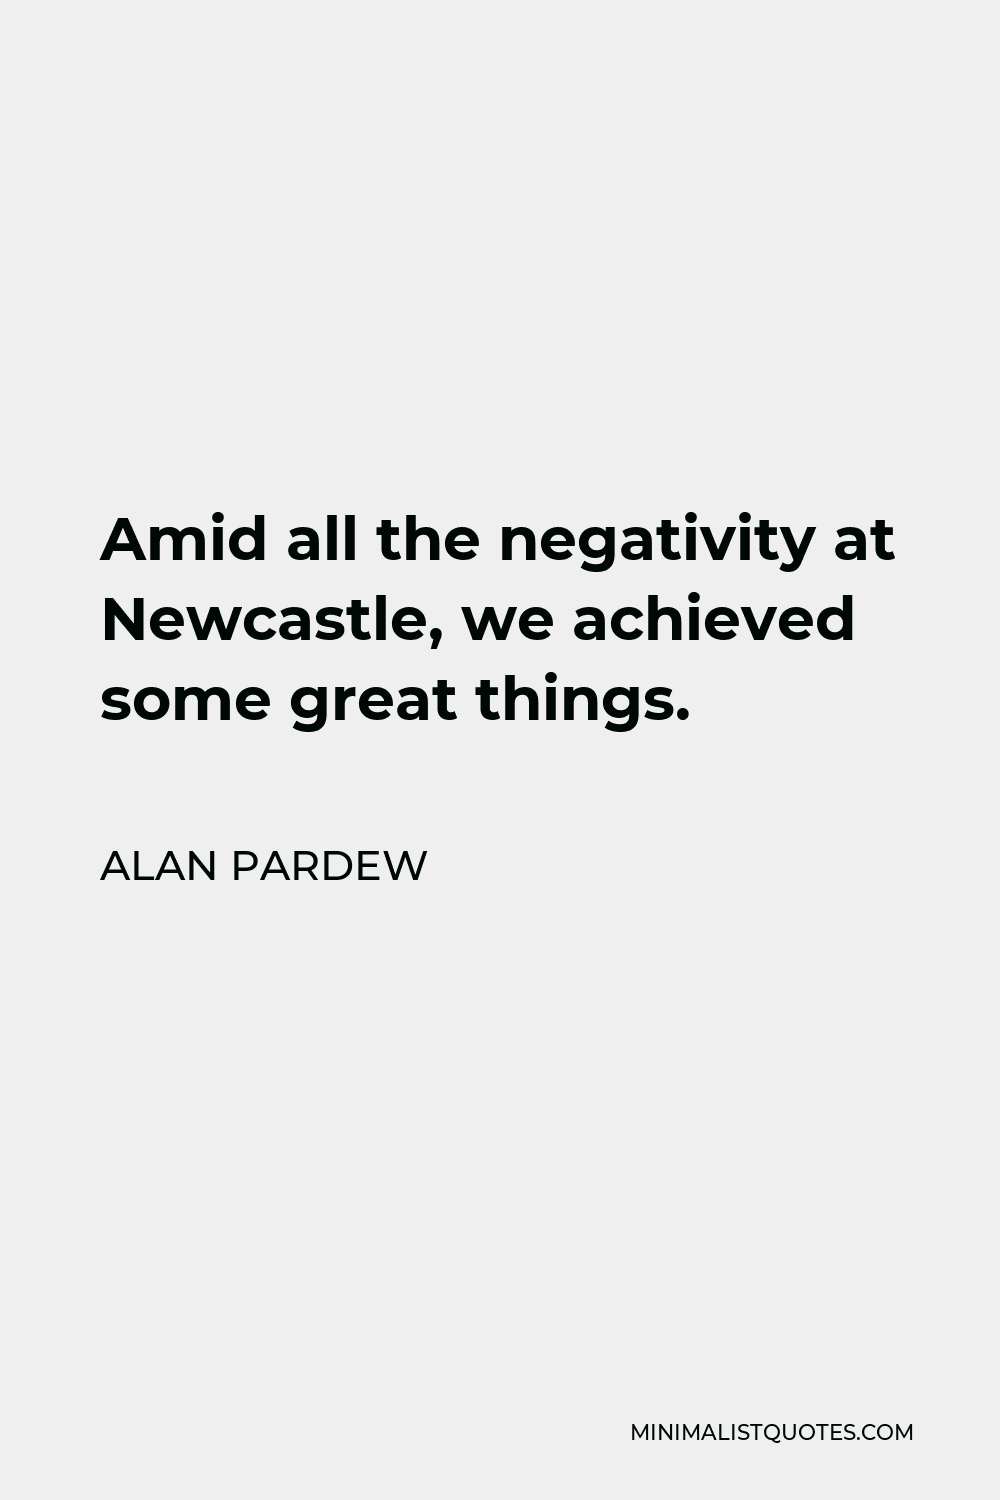 Alan Pardew Quote - Amid all the negativity at Newcastle, we achieved some great things.